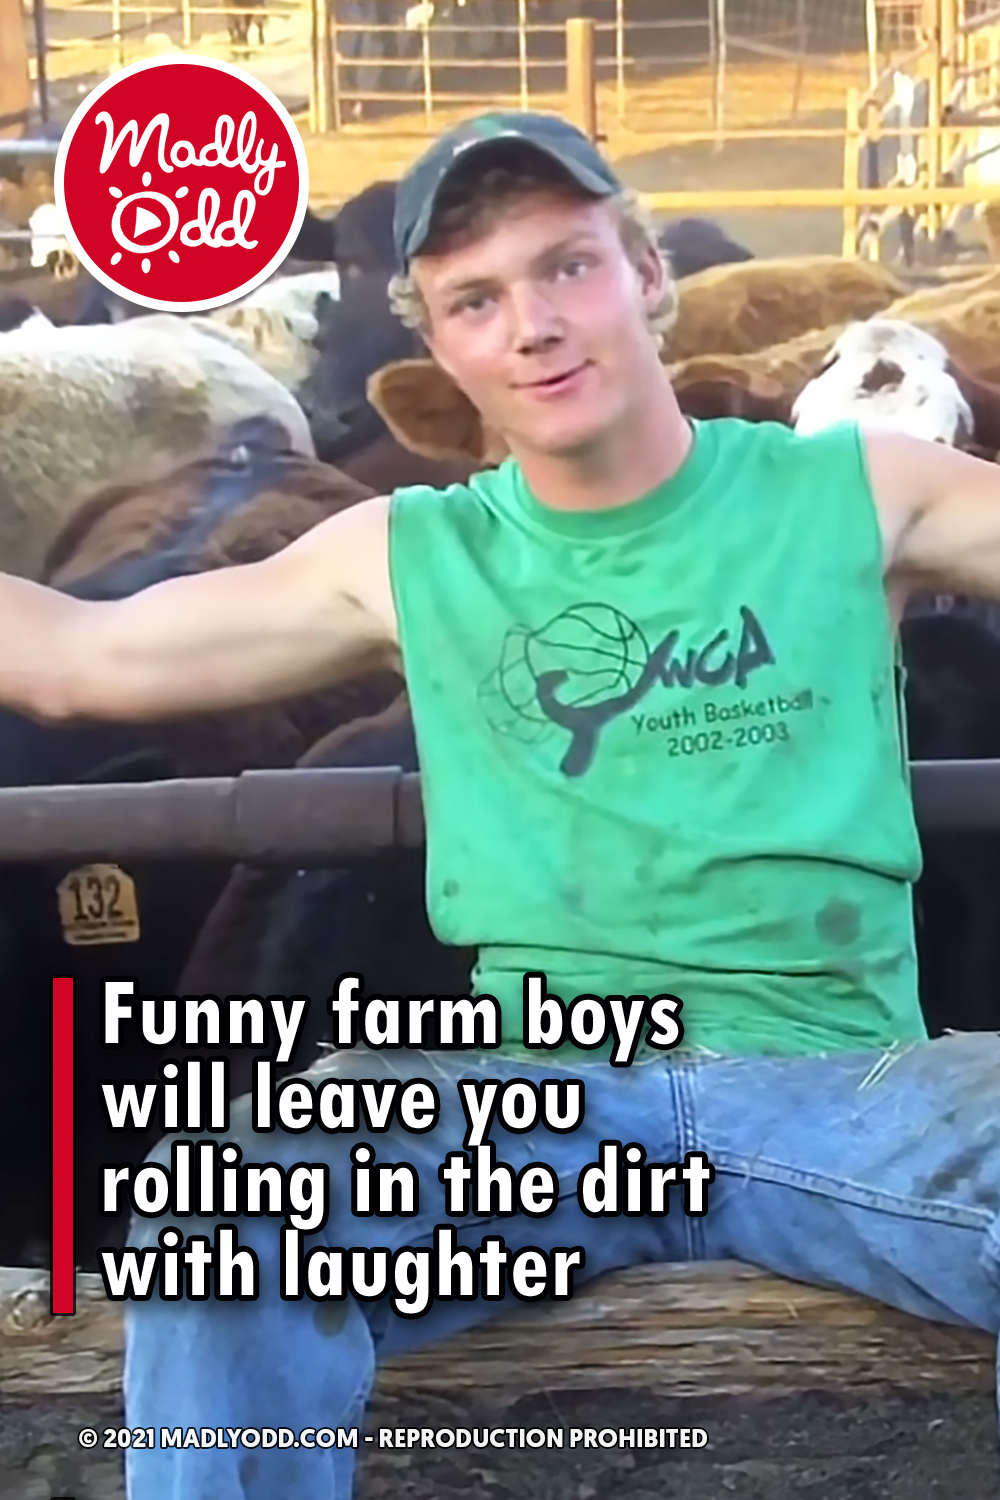 Funny farm boys will leave you rolling in the dirt with laughter